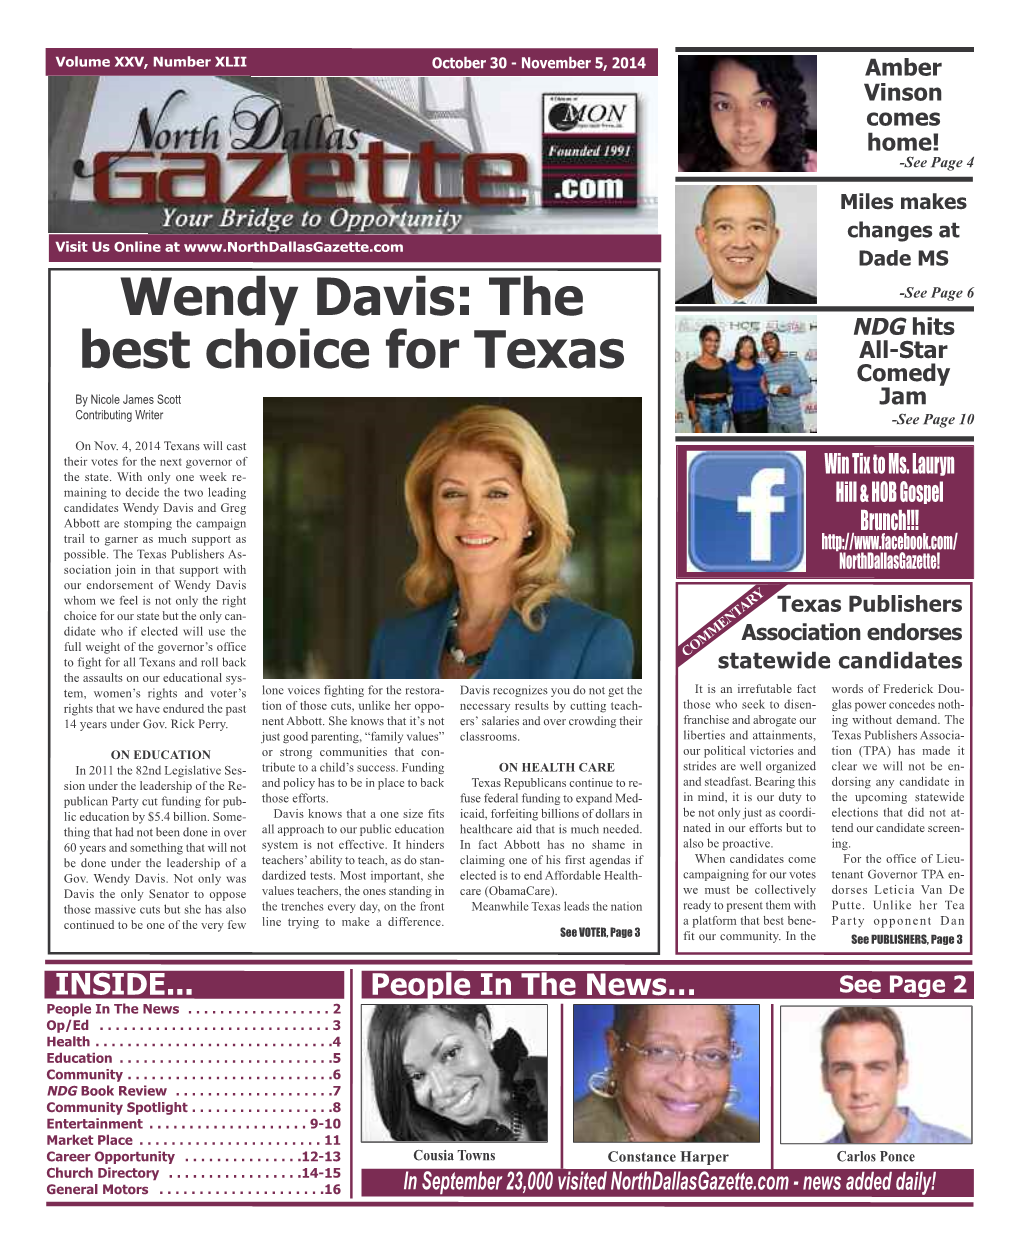 Wendy Davis: the NDG Hits All-Star Best Choice for Texas Comedy by Nicole James Scott Jam Contributing Writer -See Page 10 on Nov